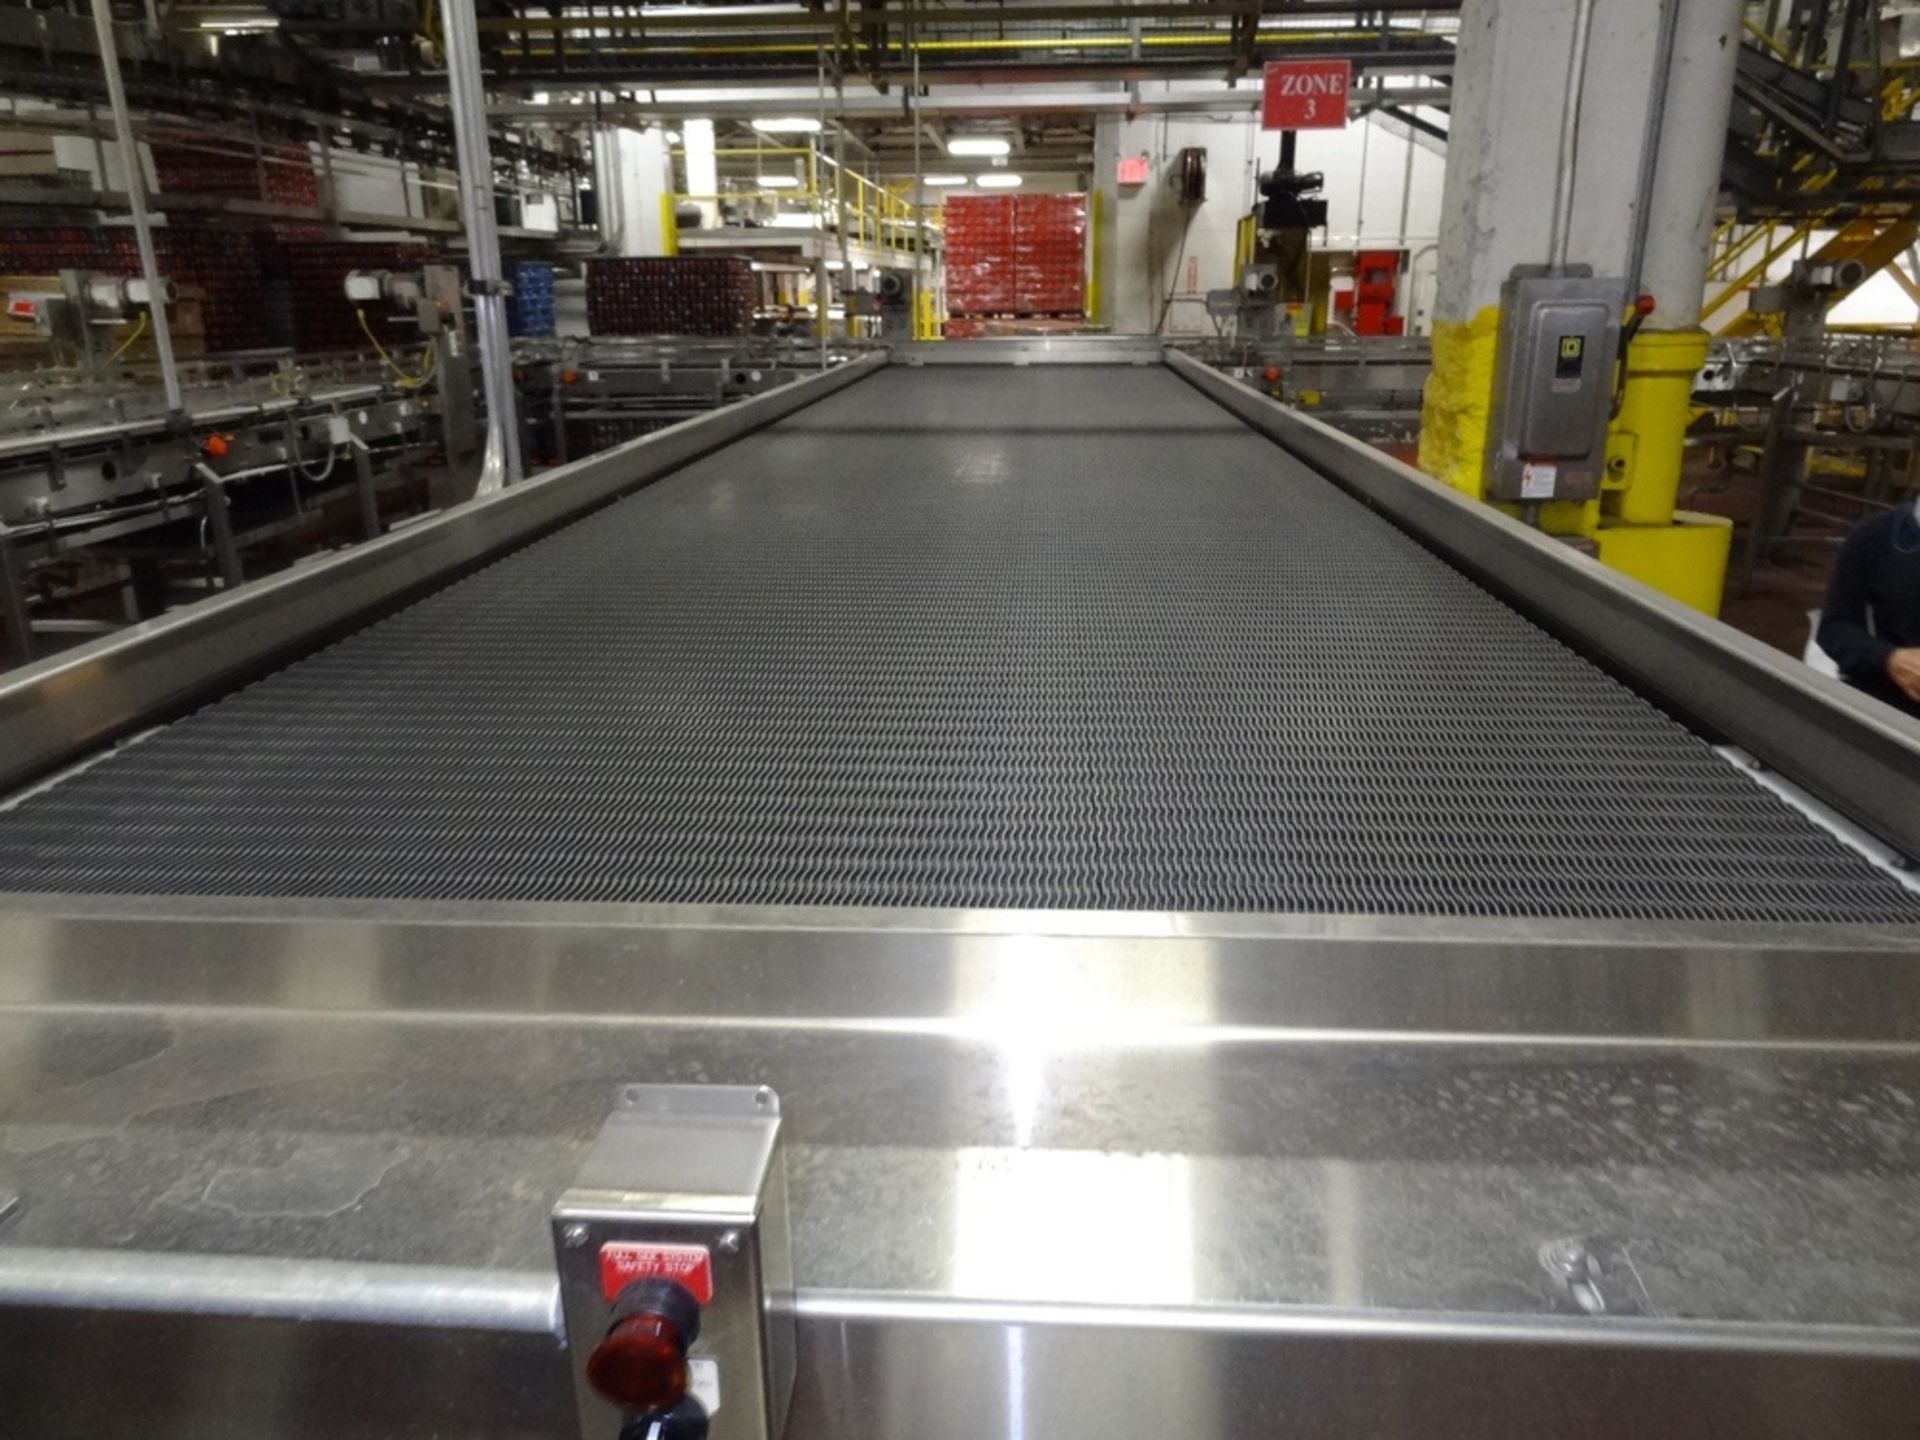 Bi-Directional Accumulation Table, 6' x 30', Stainless Steel Frame, In | Subject to Bulk Bid Lot #2 - Image 2 of 3